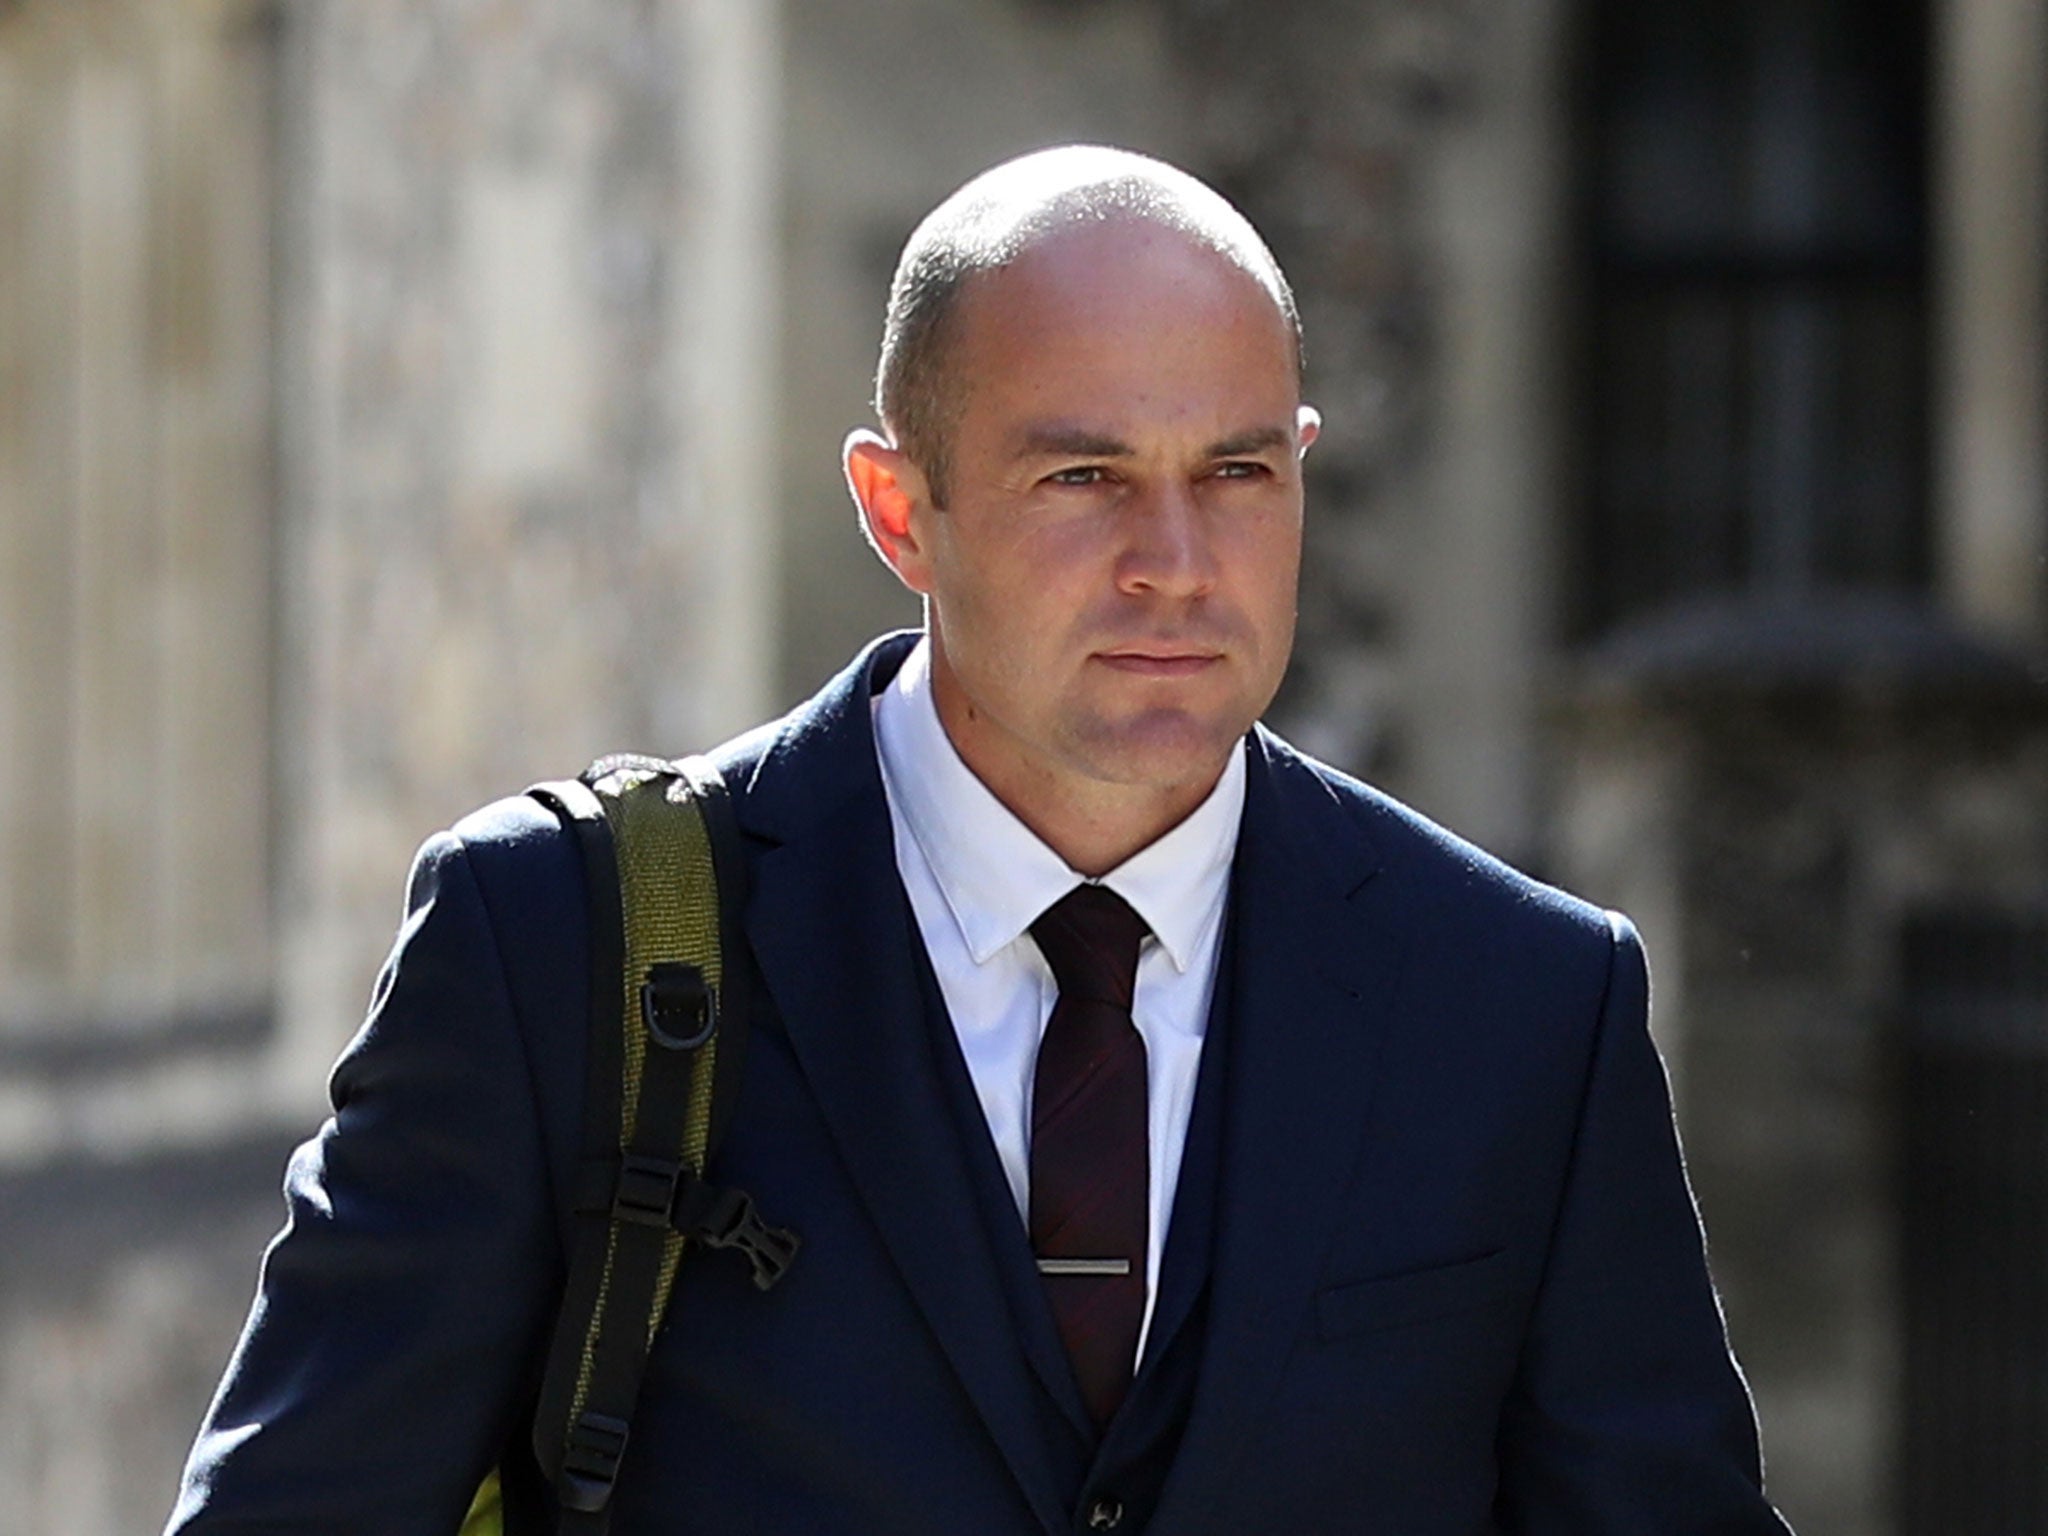 Emile Cilliers is accused of attempting to murder his wife